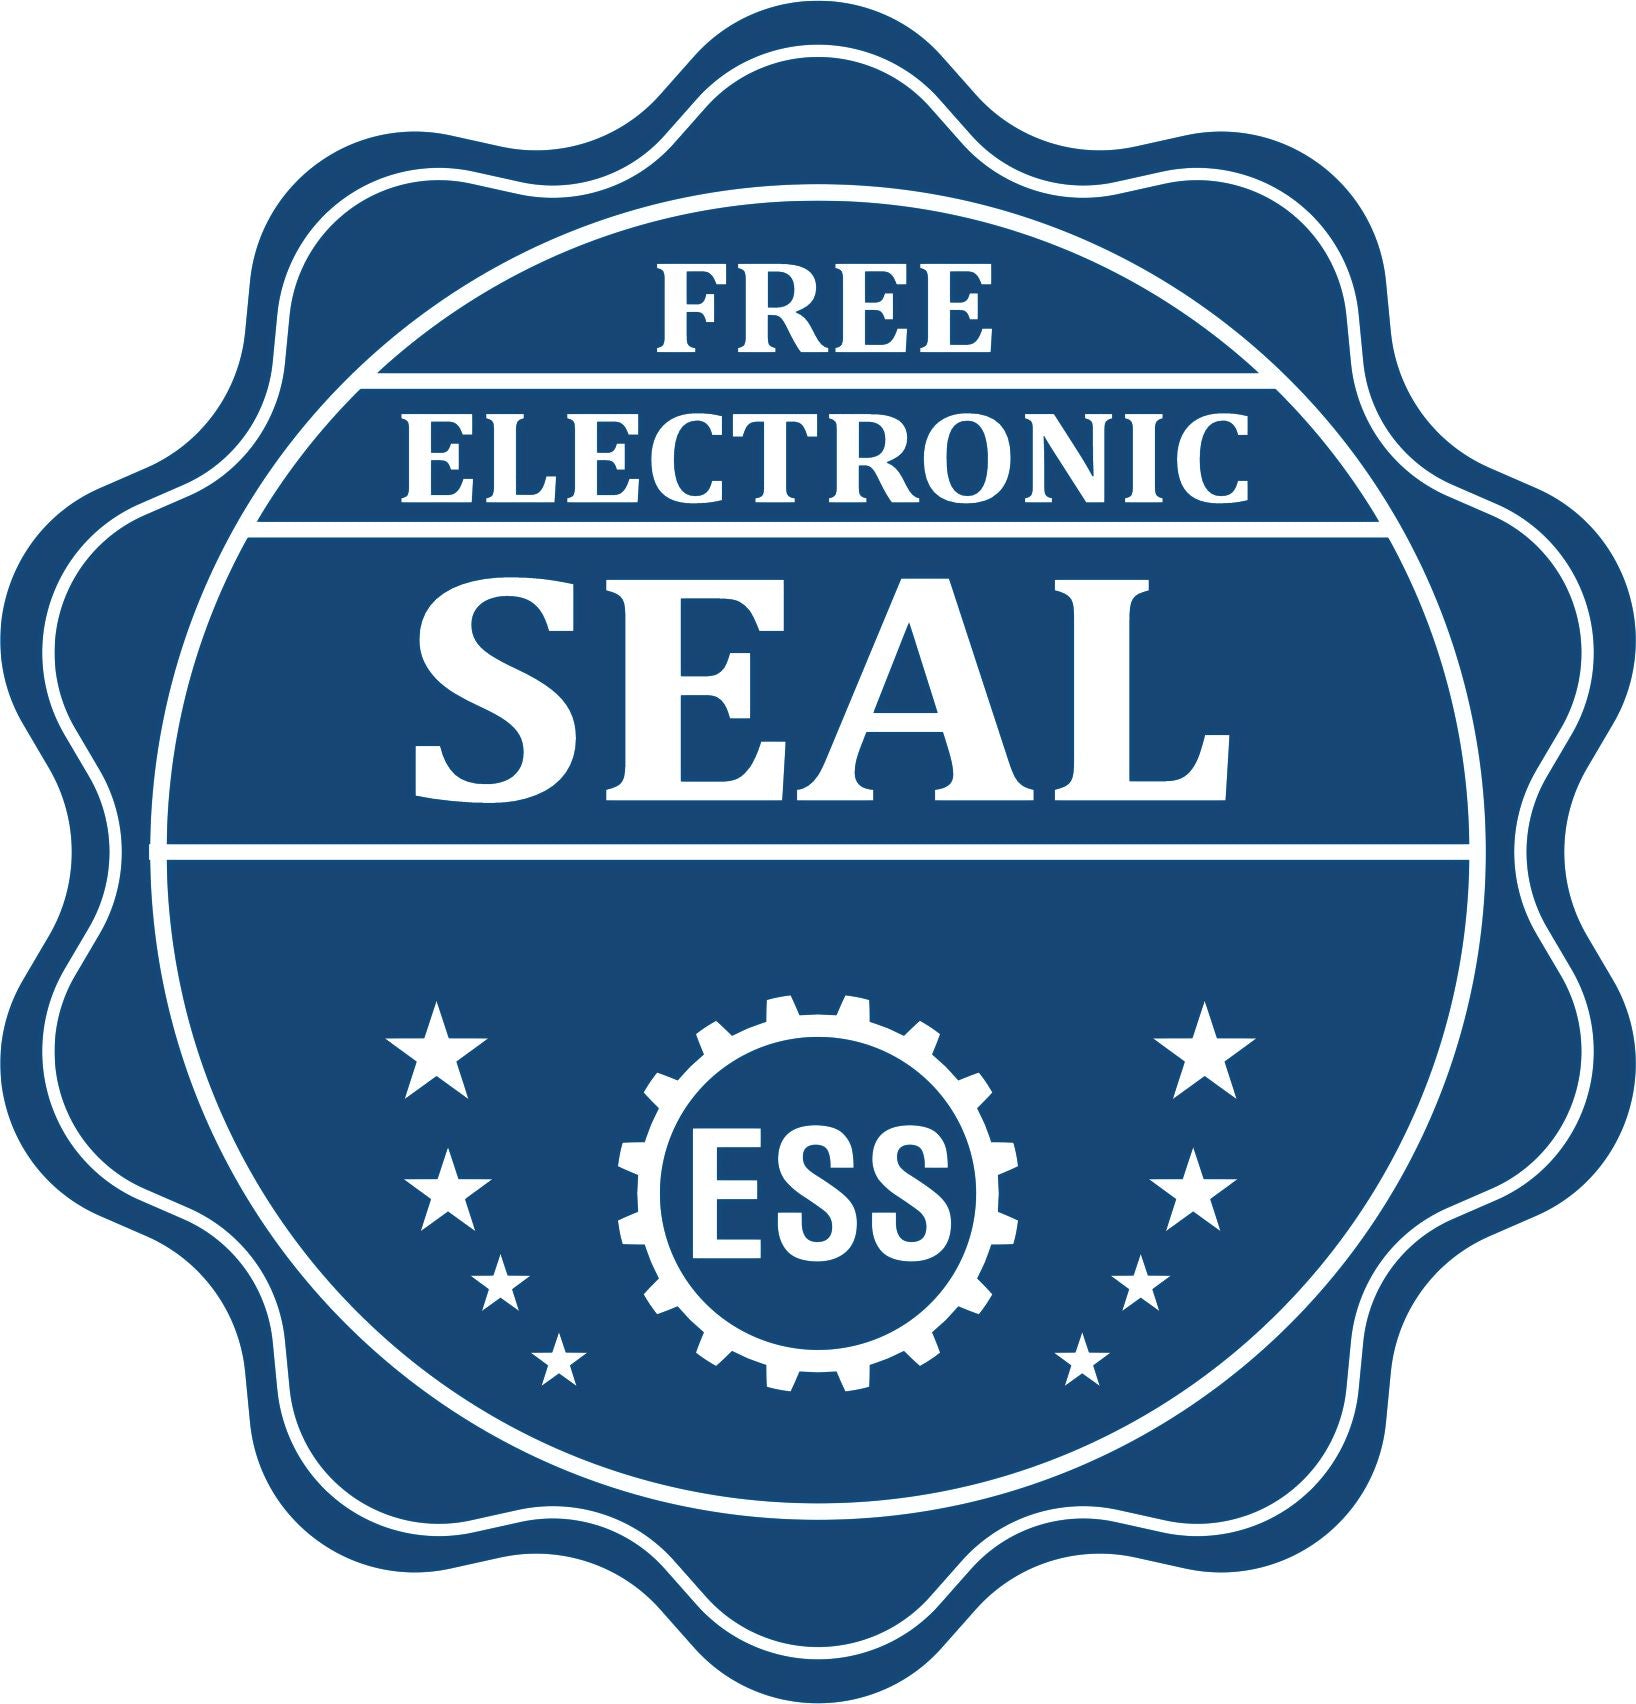 A badge showing a free electronic seal for the Extended Long Reach New York Surveyor Embosser with stars and the ESS gear on the emblem.